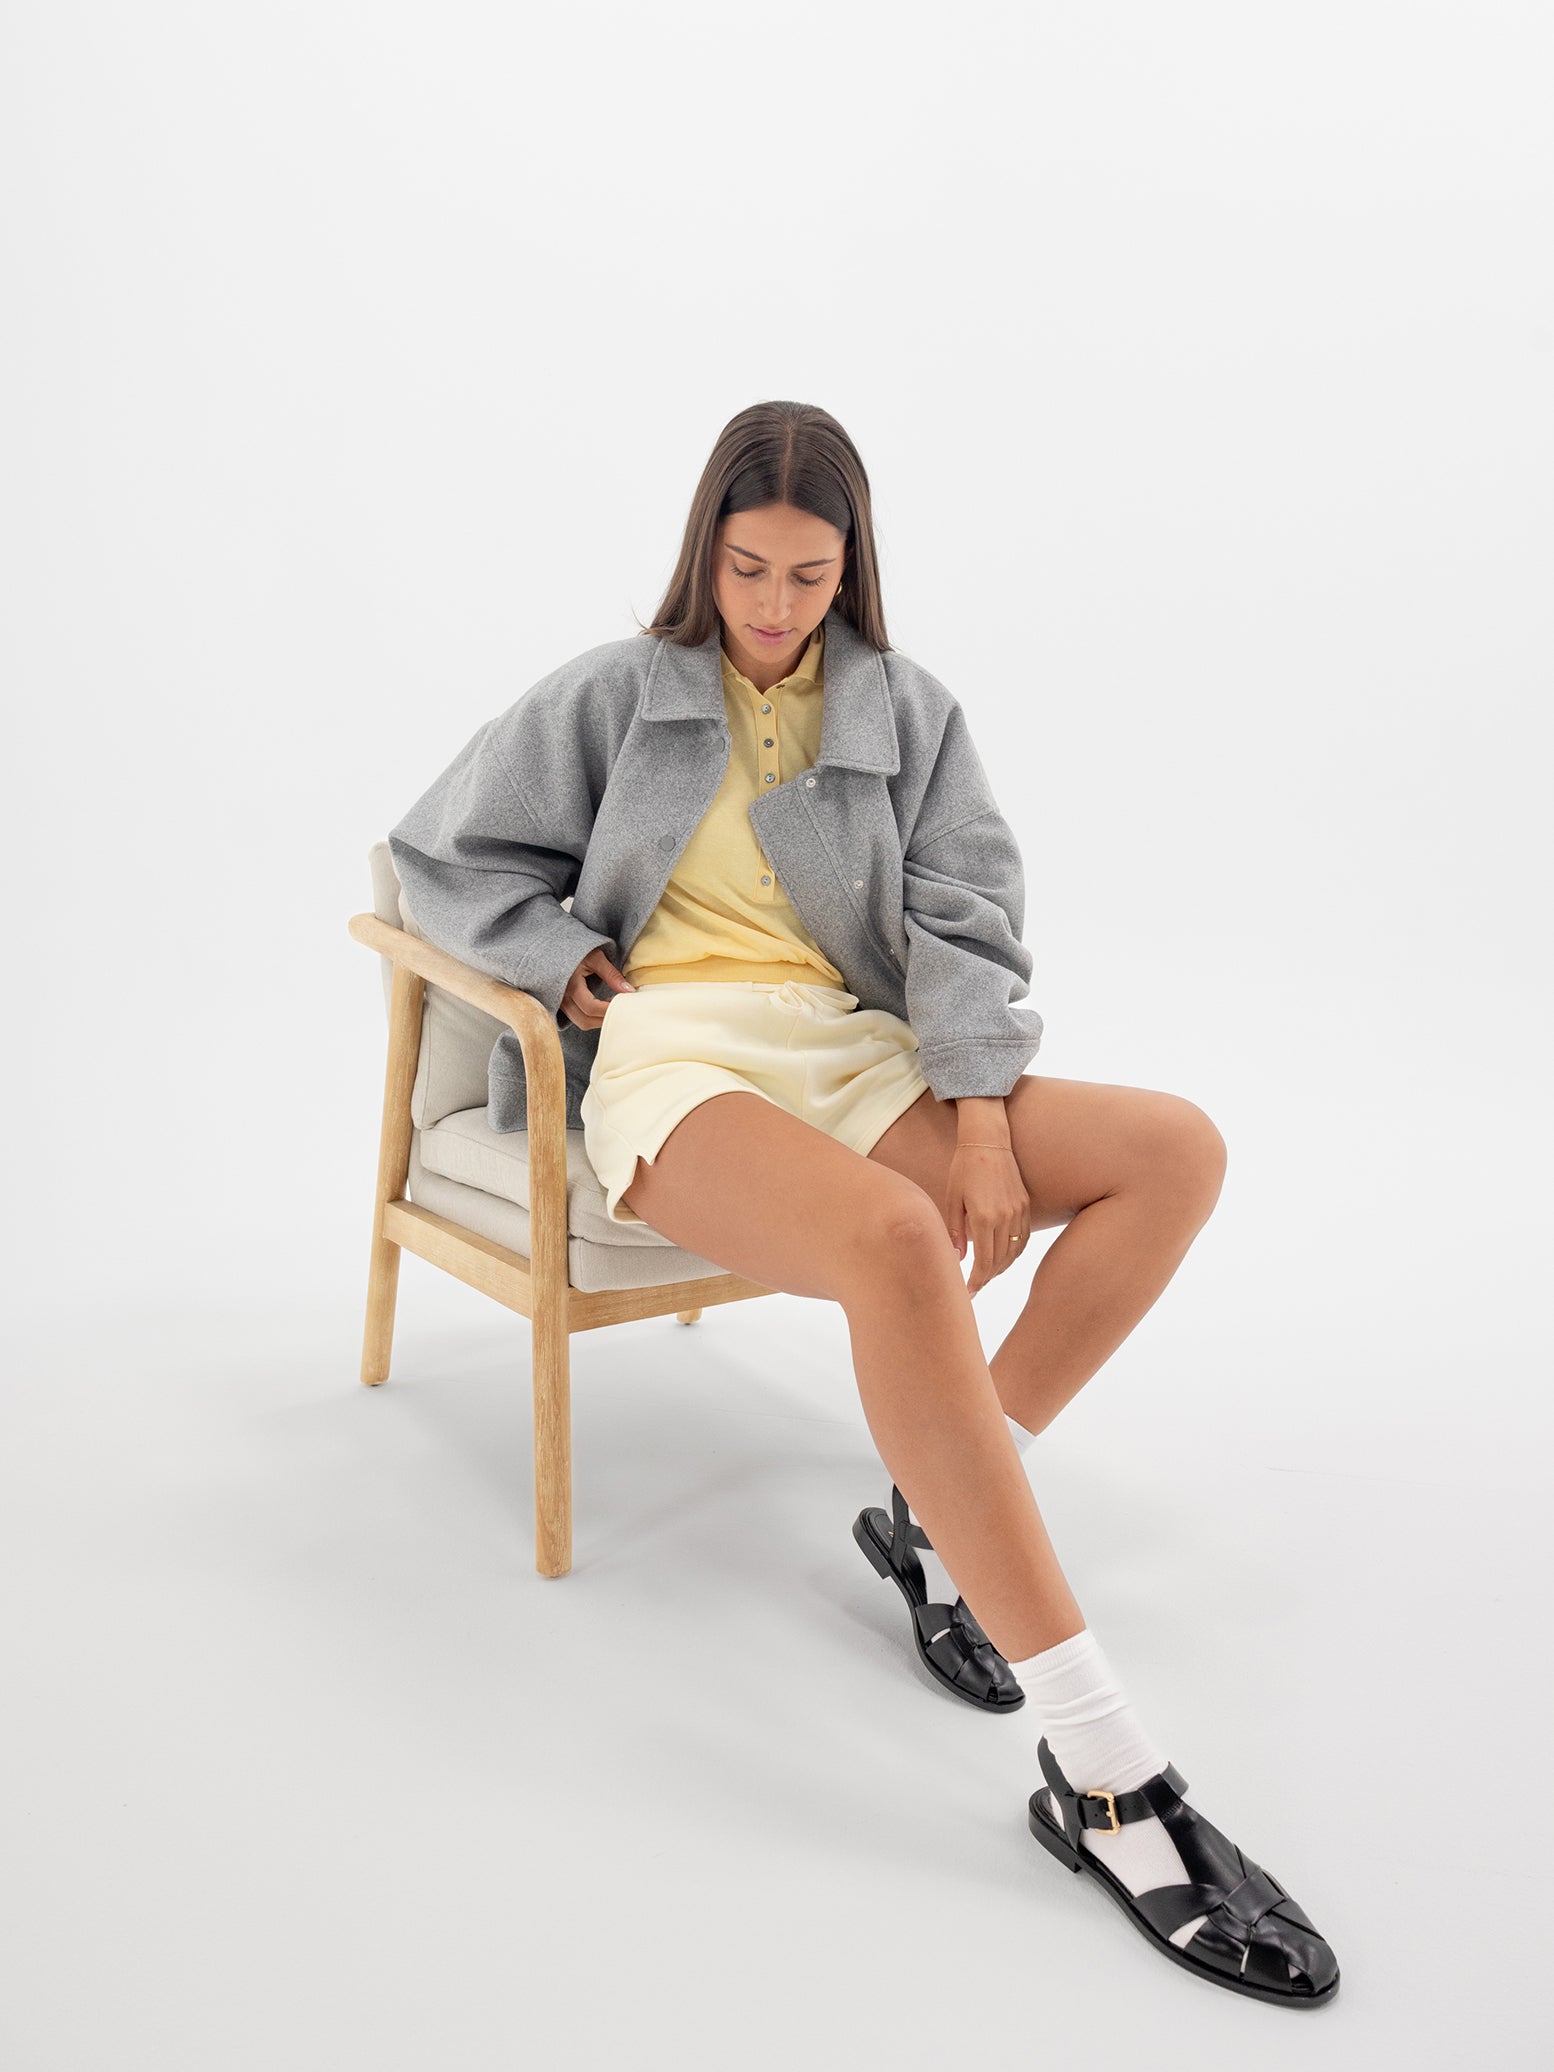 Lemonade CityScape Shorts. The shorts are being worn by a female model sitting on a chair. The model is wearing dress shoes. The background it a white background. 